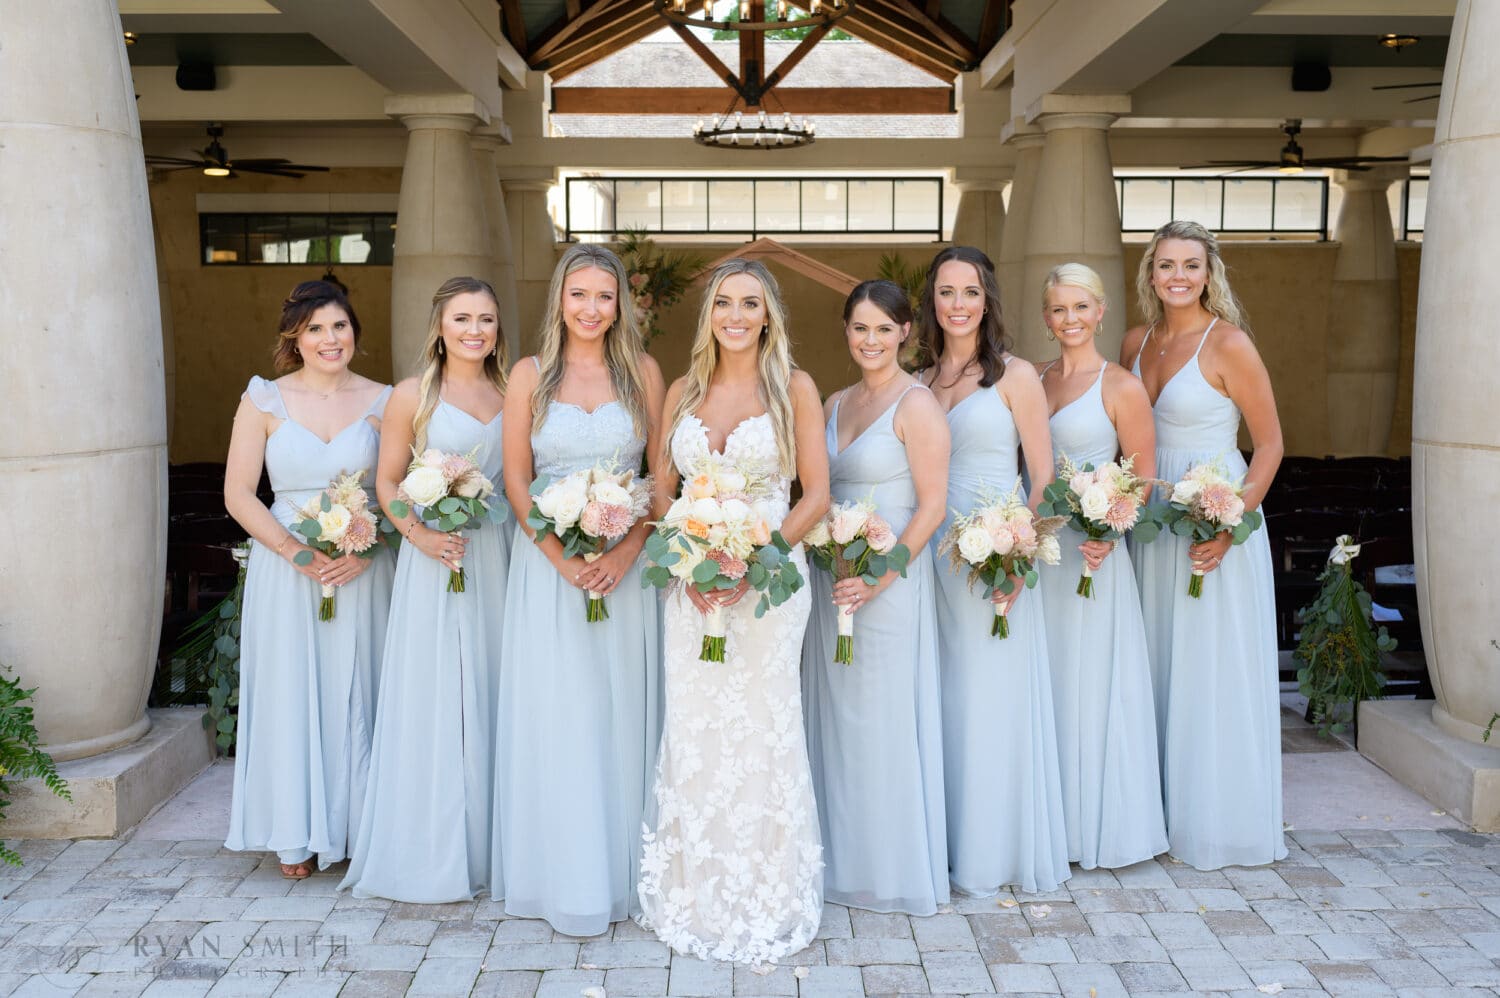 Bride with bridesmaids - 21 Main Events